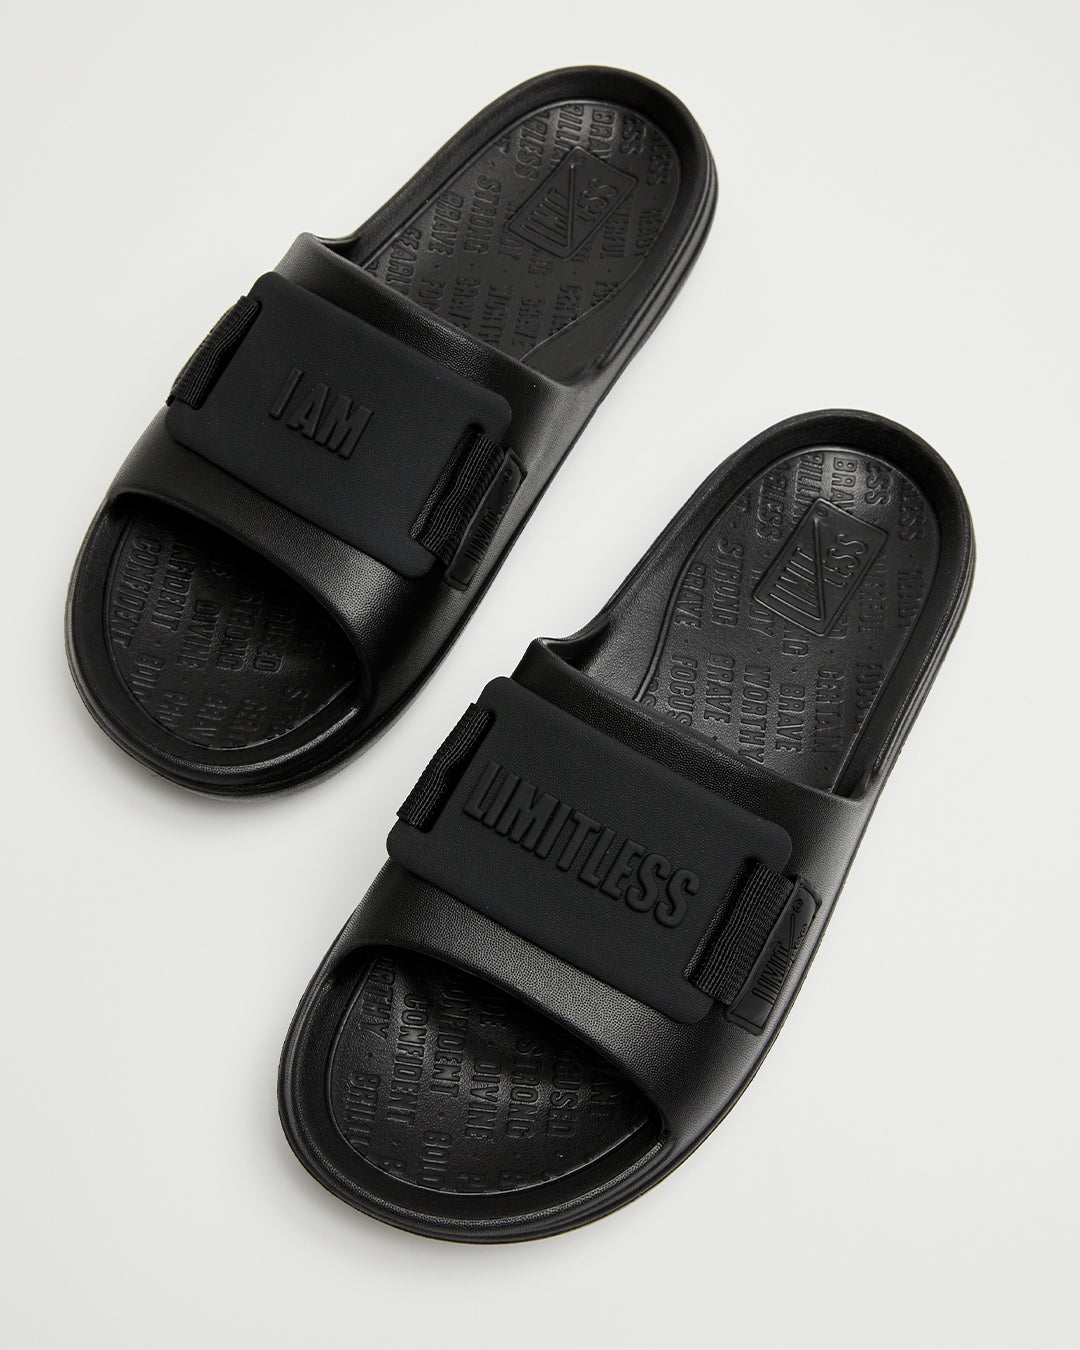 LIMITLESS SLIDES™ WITH ESSENTIAL TIBAH™ QUAD - FOSSIL RIDGE HIGH SCHOOL EDITION